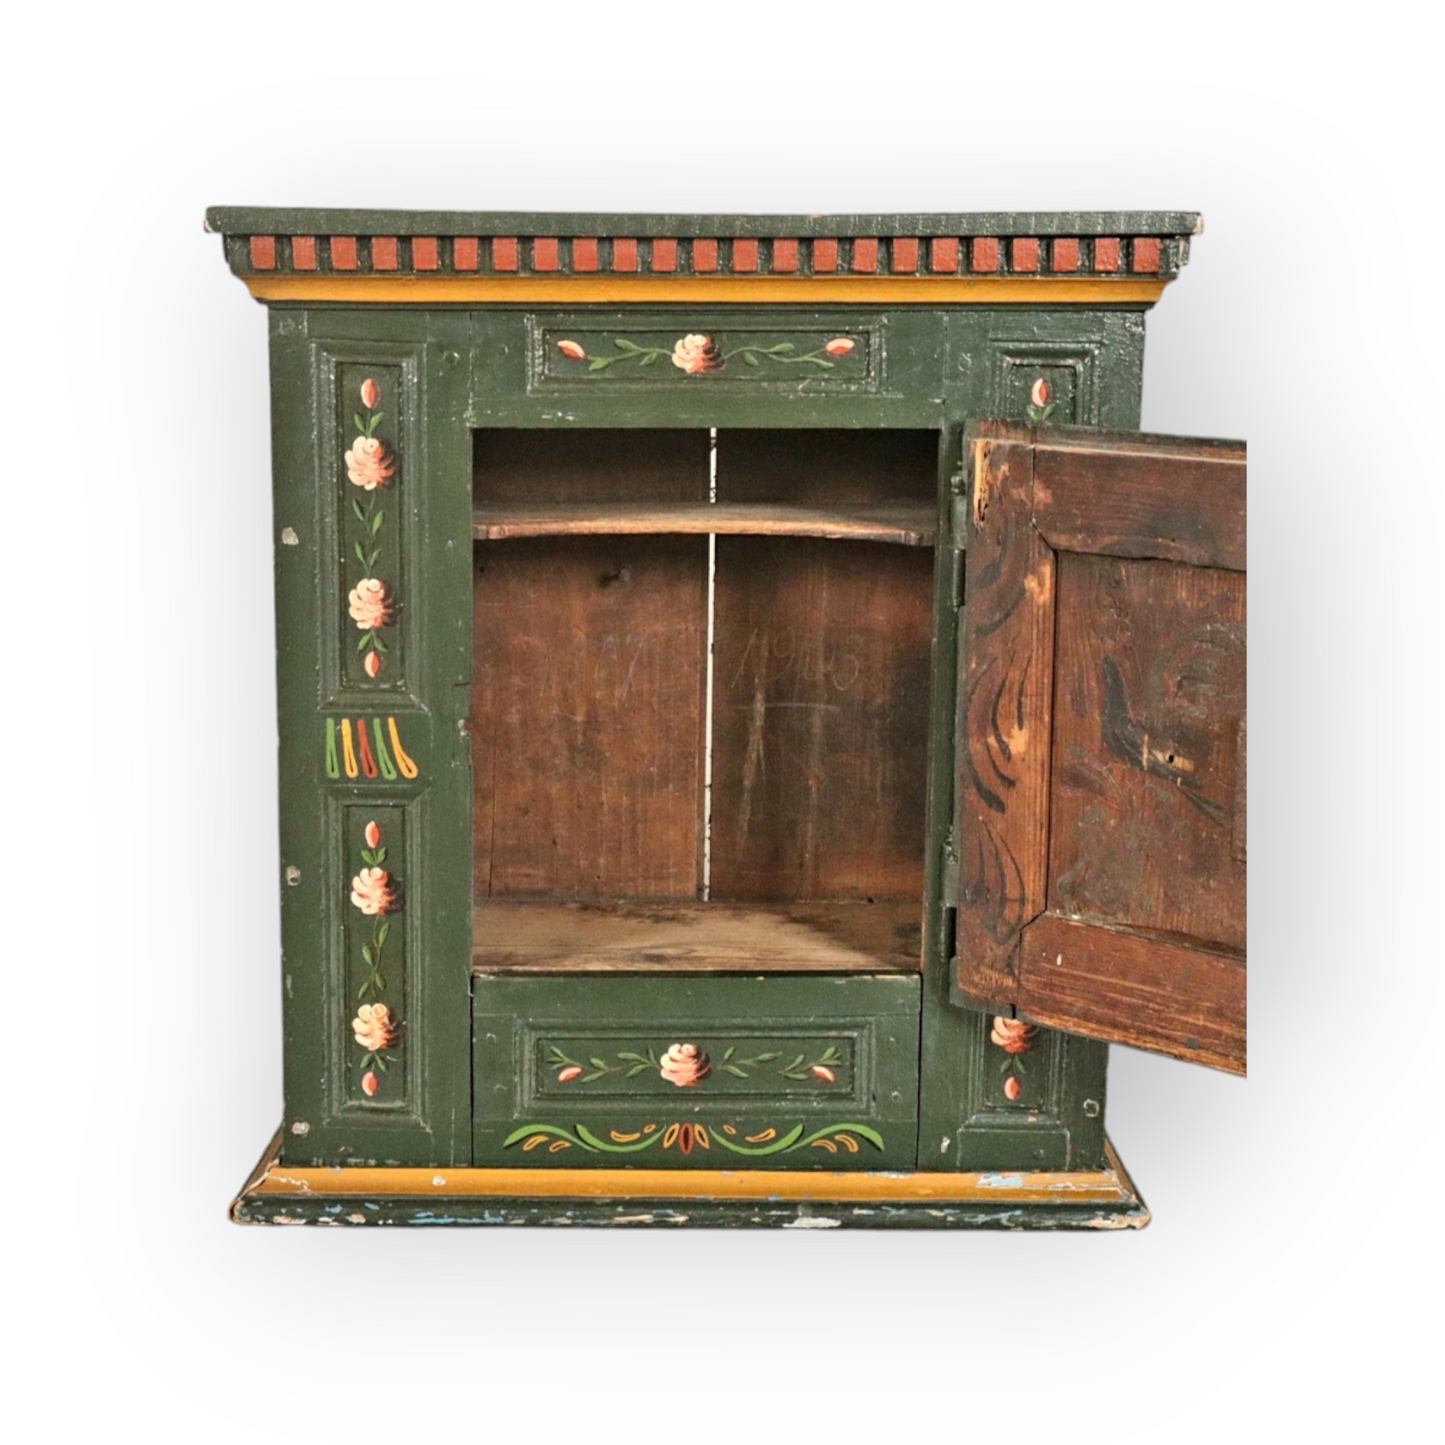 Early 19th Century Swedish Antique Folk Art Decorated Wall Cupboard of Small Proportions Dated "1836"